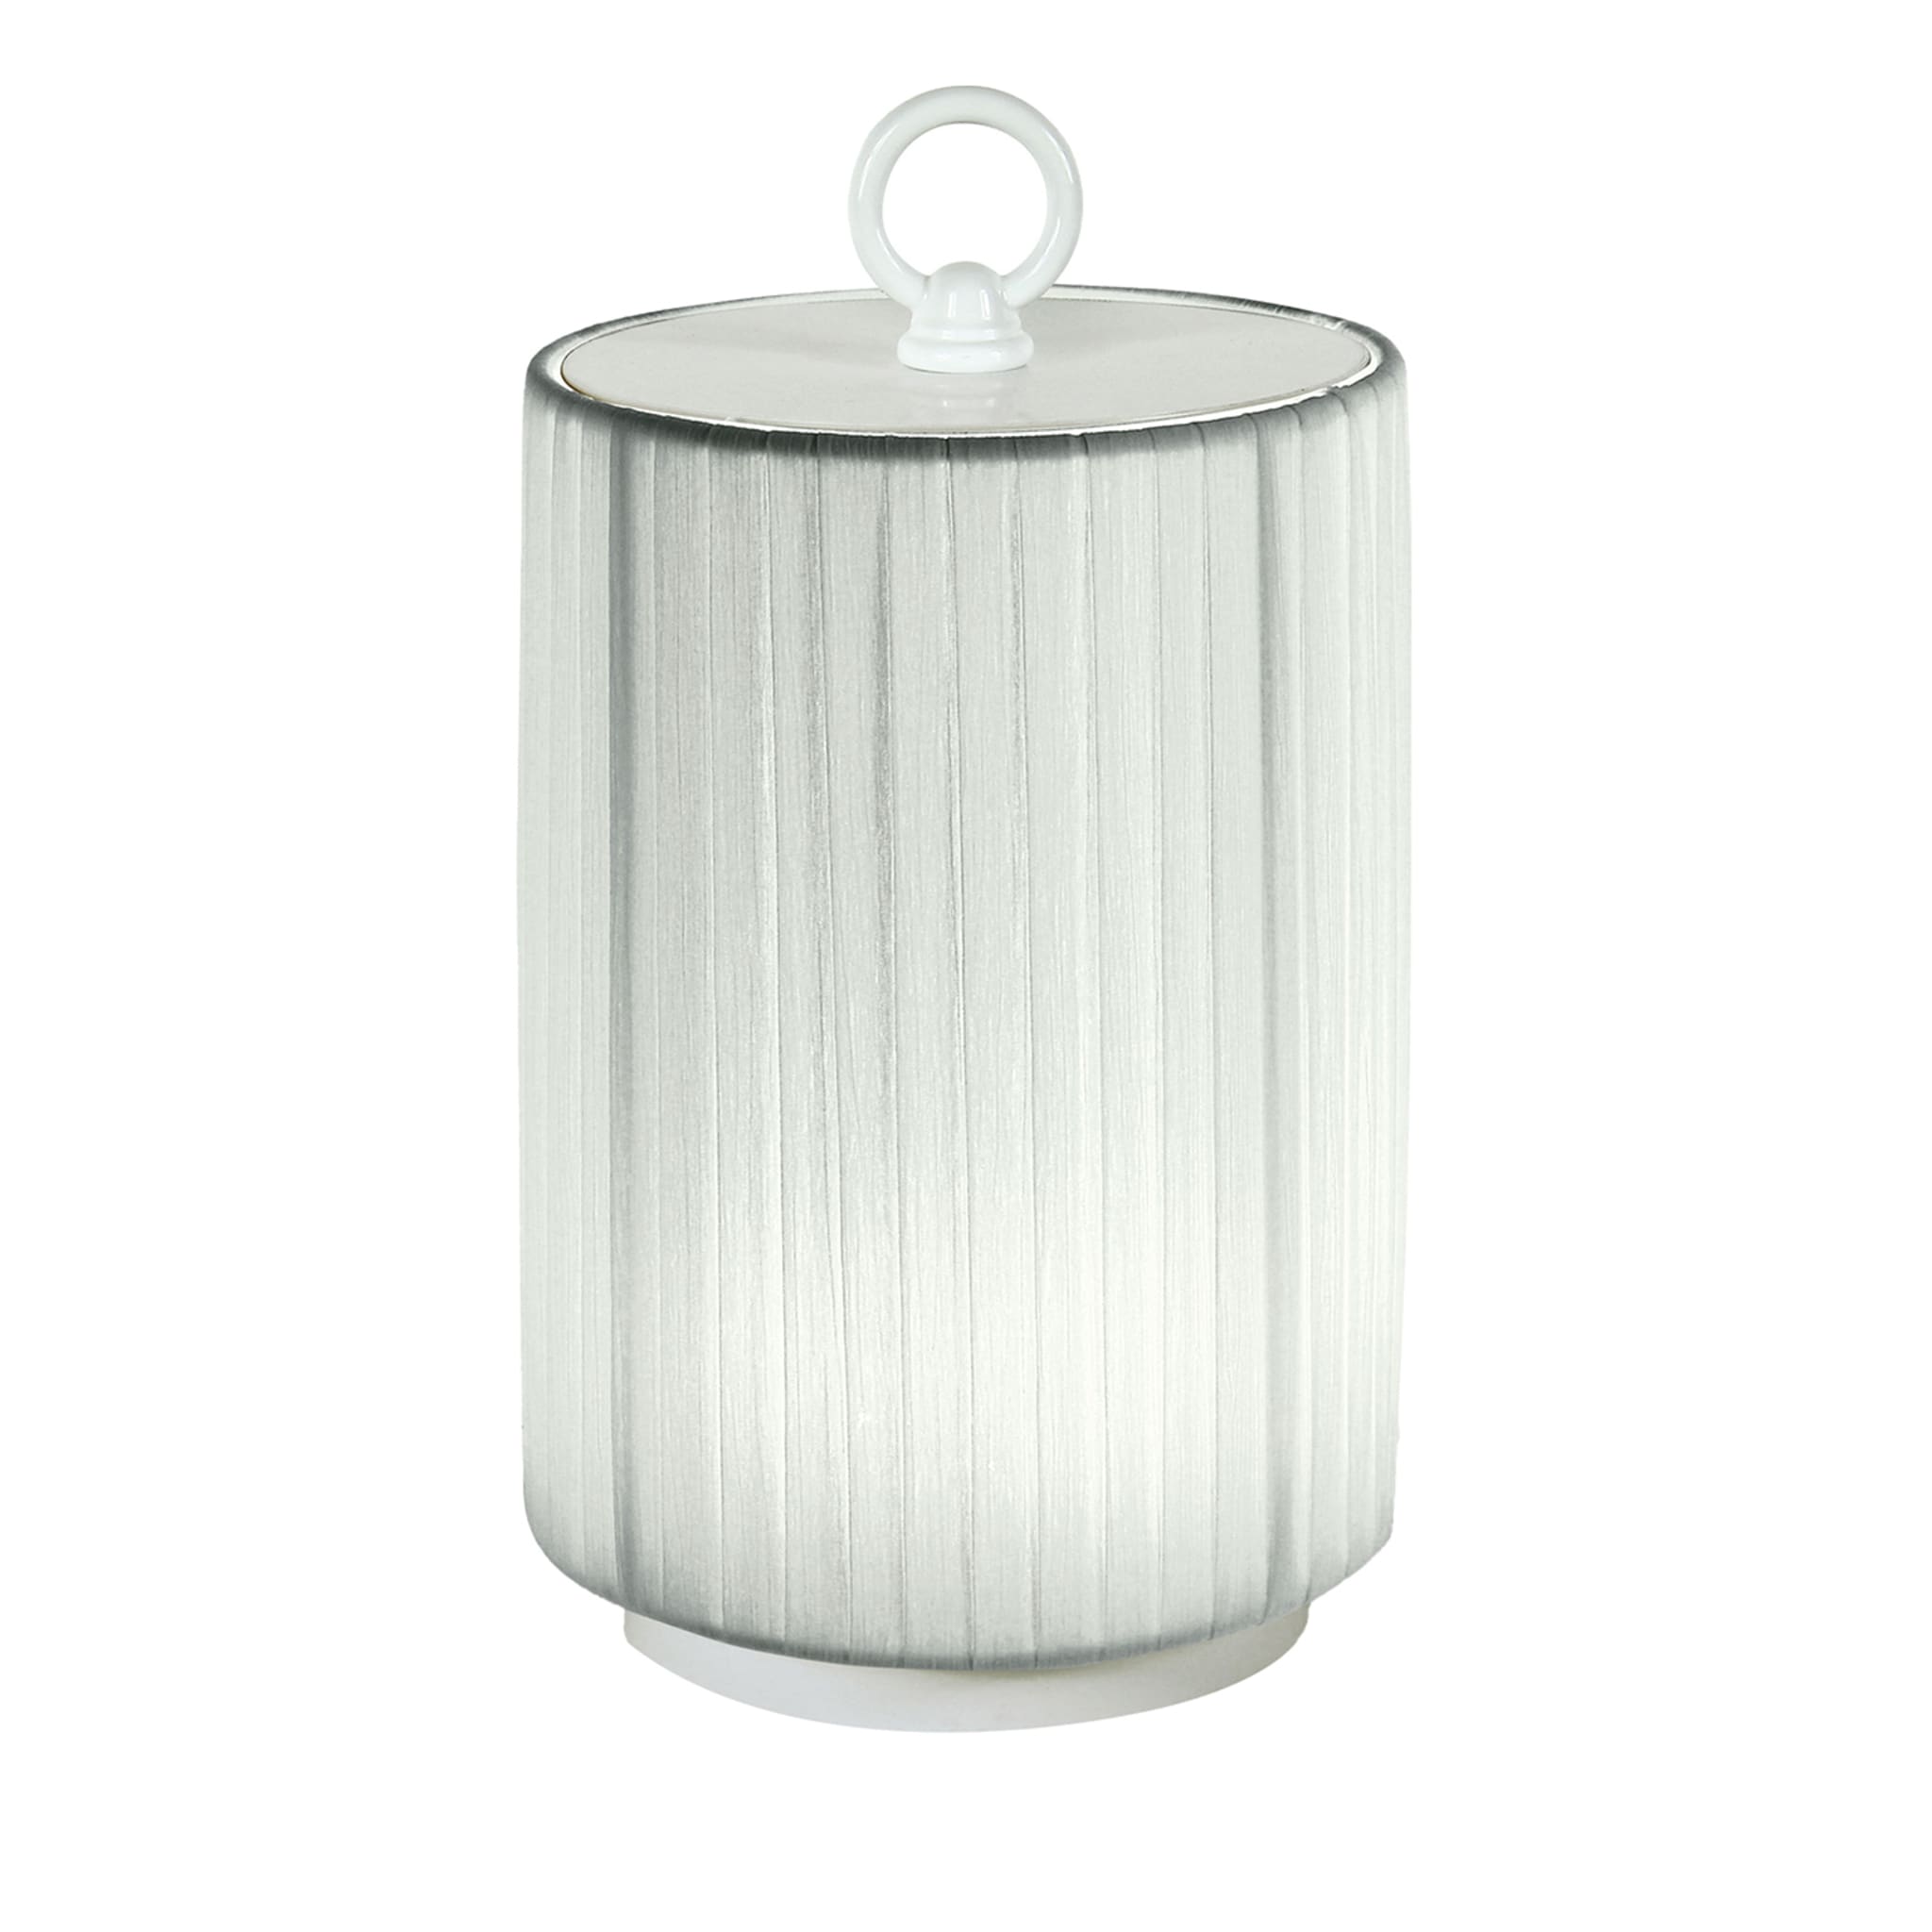 Starlet T Creponne White Table Lamp by Stefano Tabarin - Main view